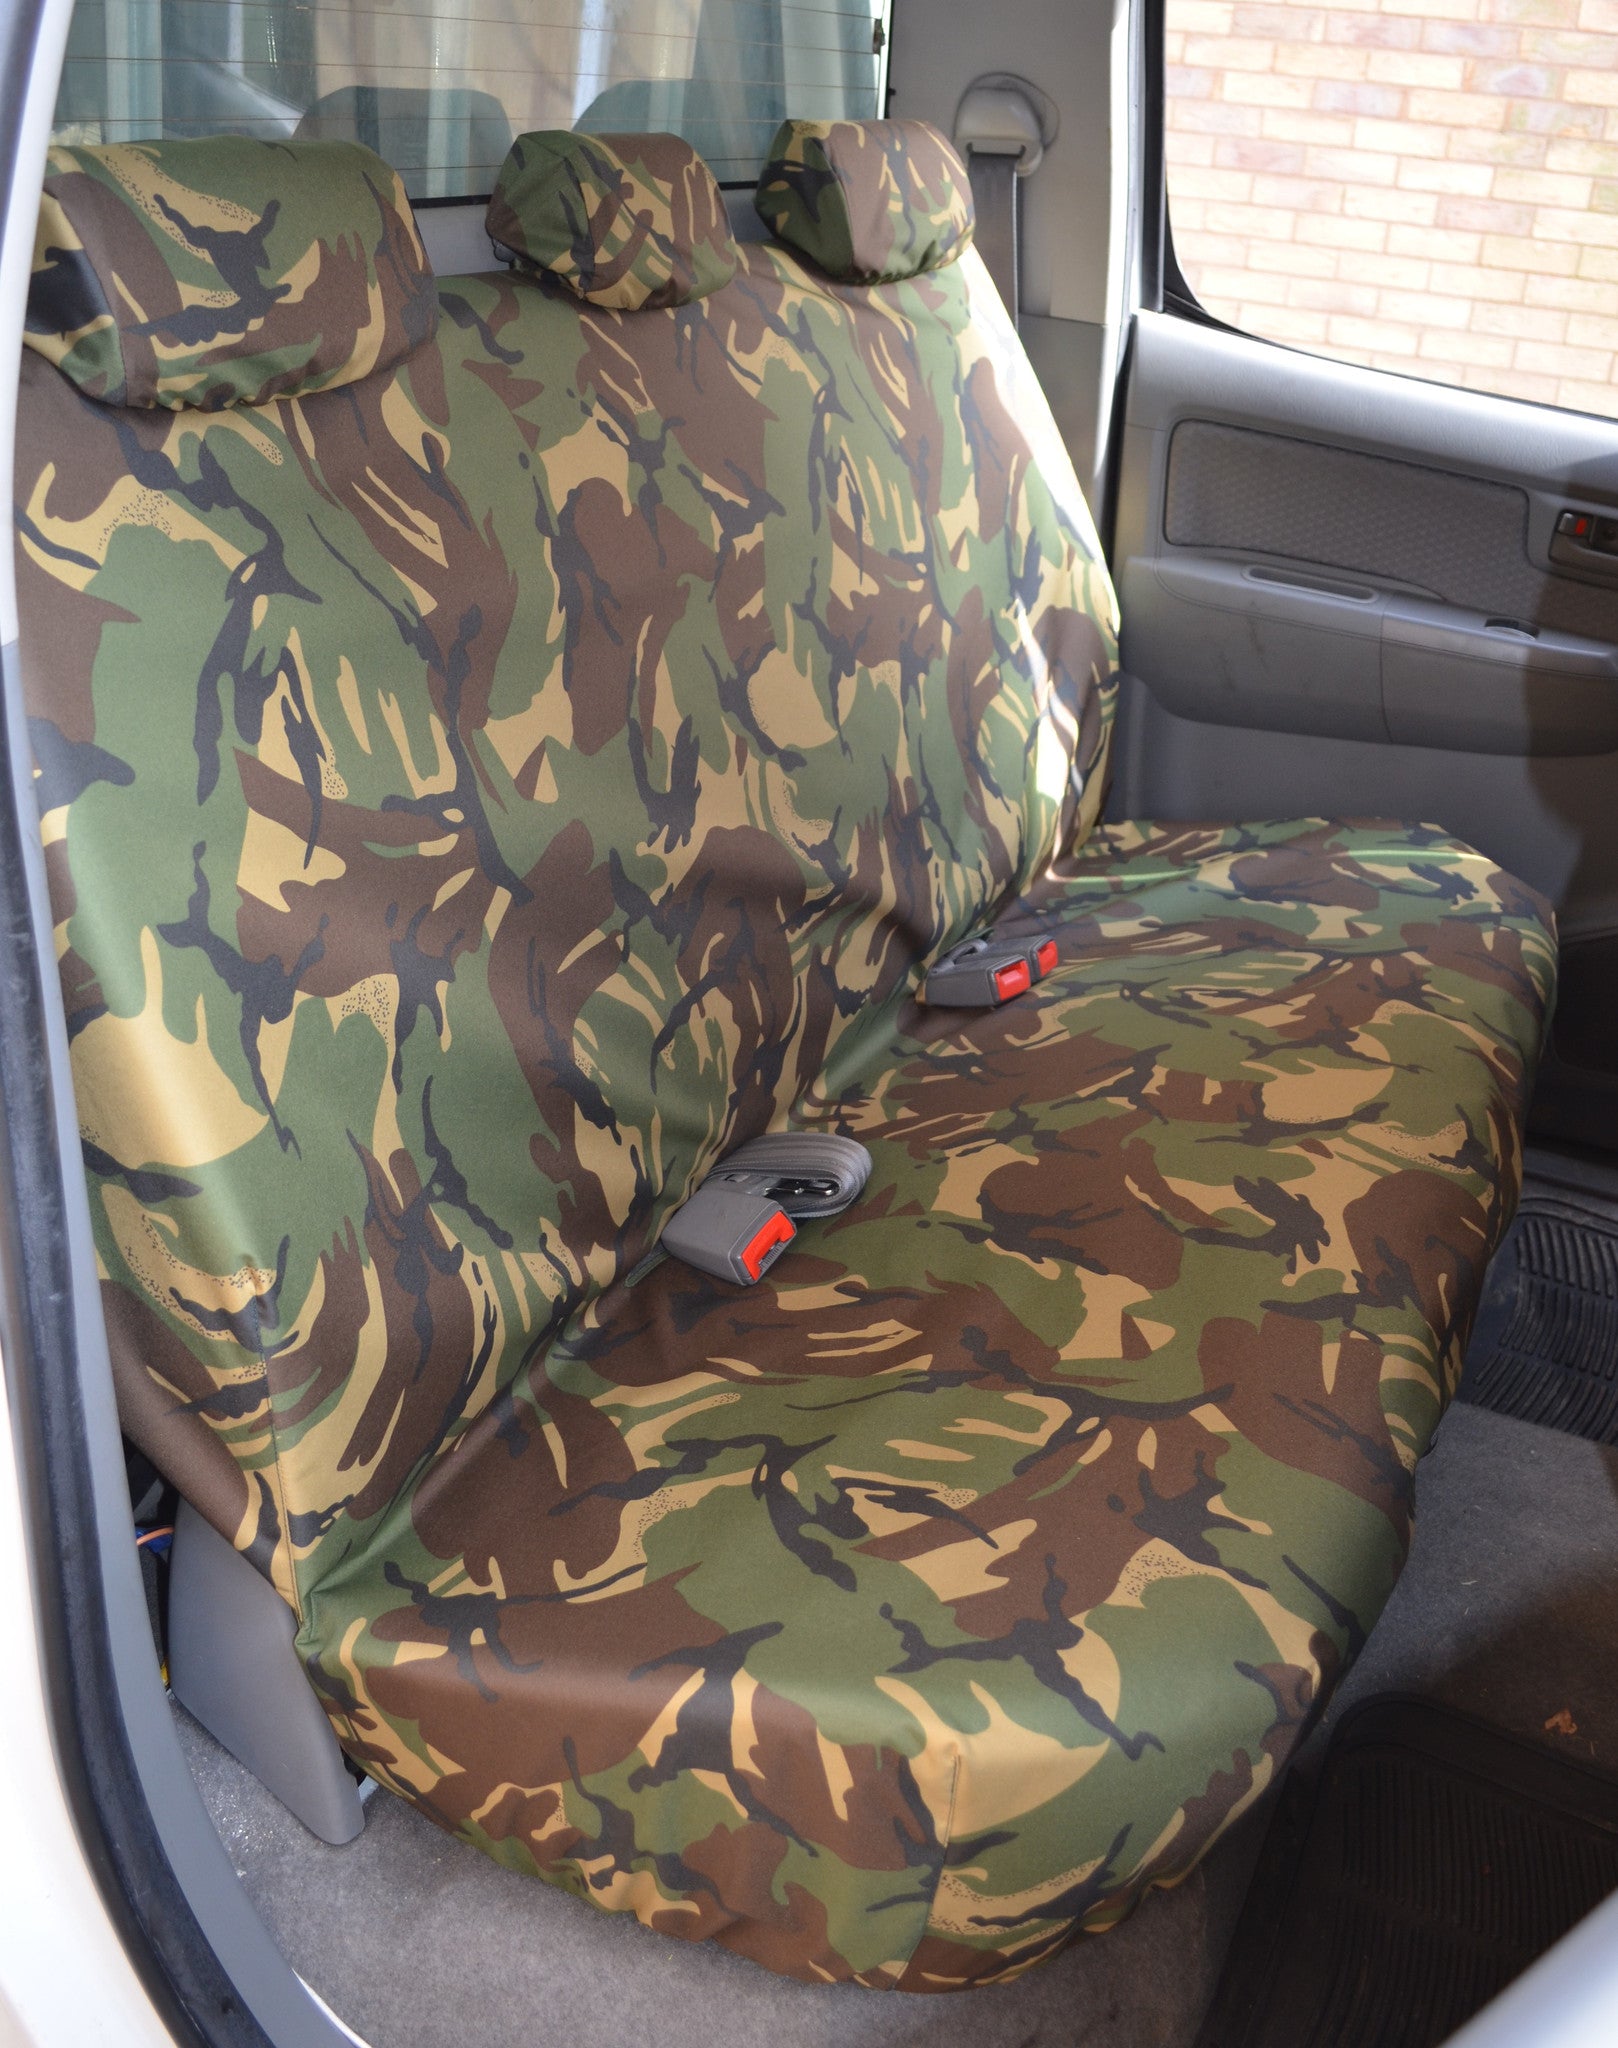 TOYOUN Camo Universal Front Car Seat Covers Waterproof Highback Bucket Seat  Covers Green Forest Camouflage Print-Fit Most Cars, Trucks, SUVS, Vans 2